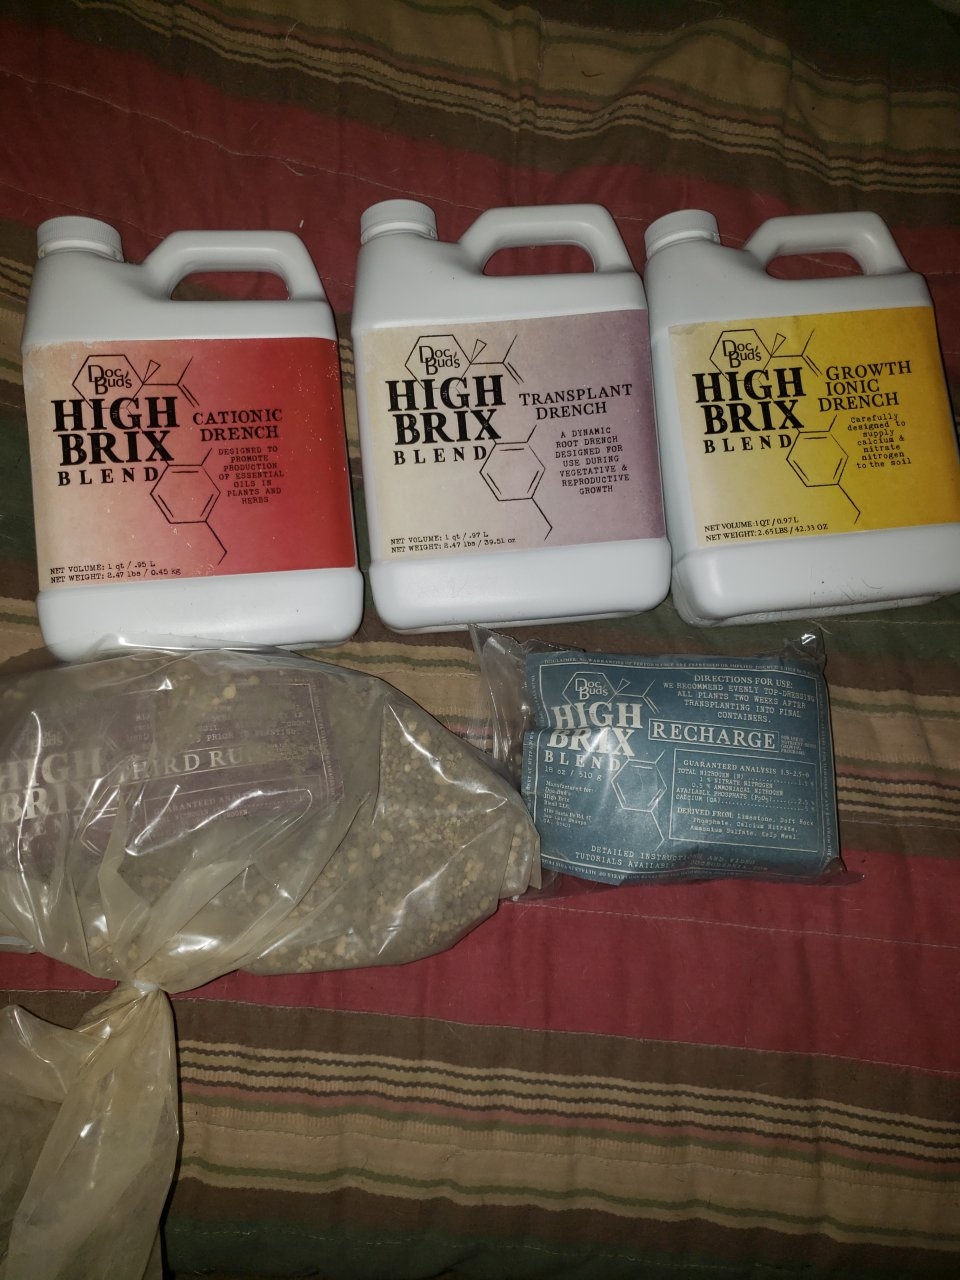 New HB order showed up time to mix up some soil